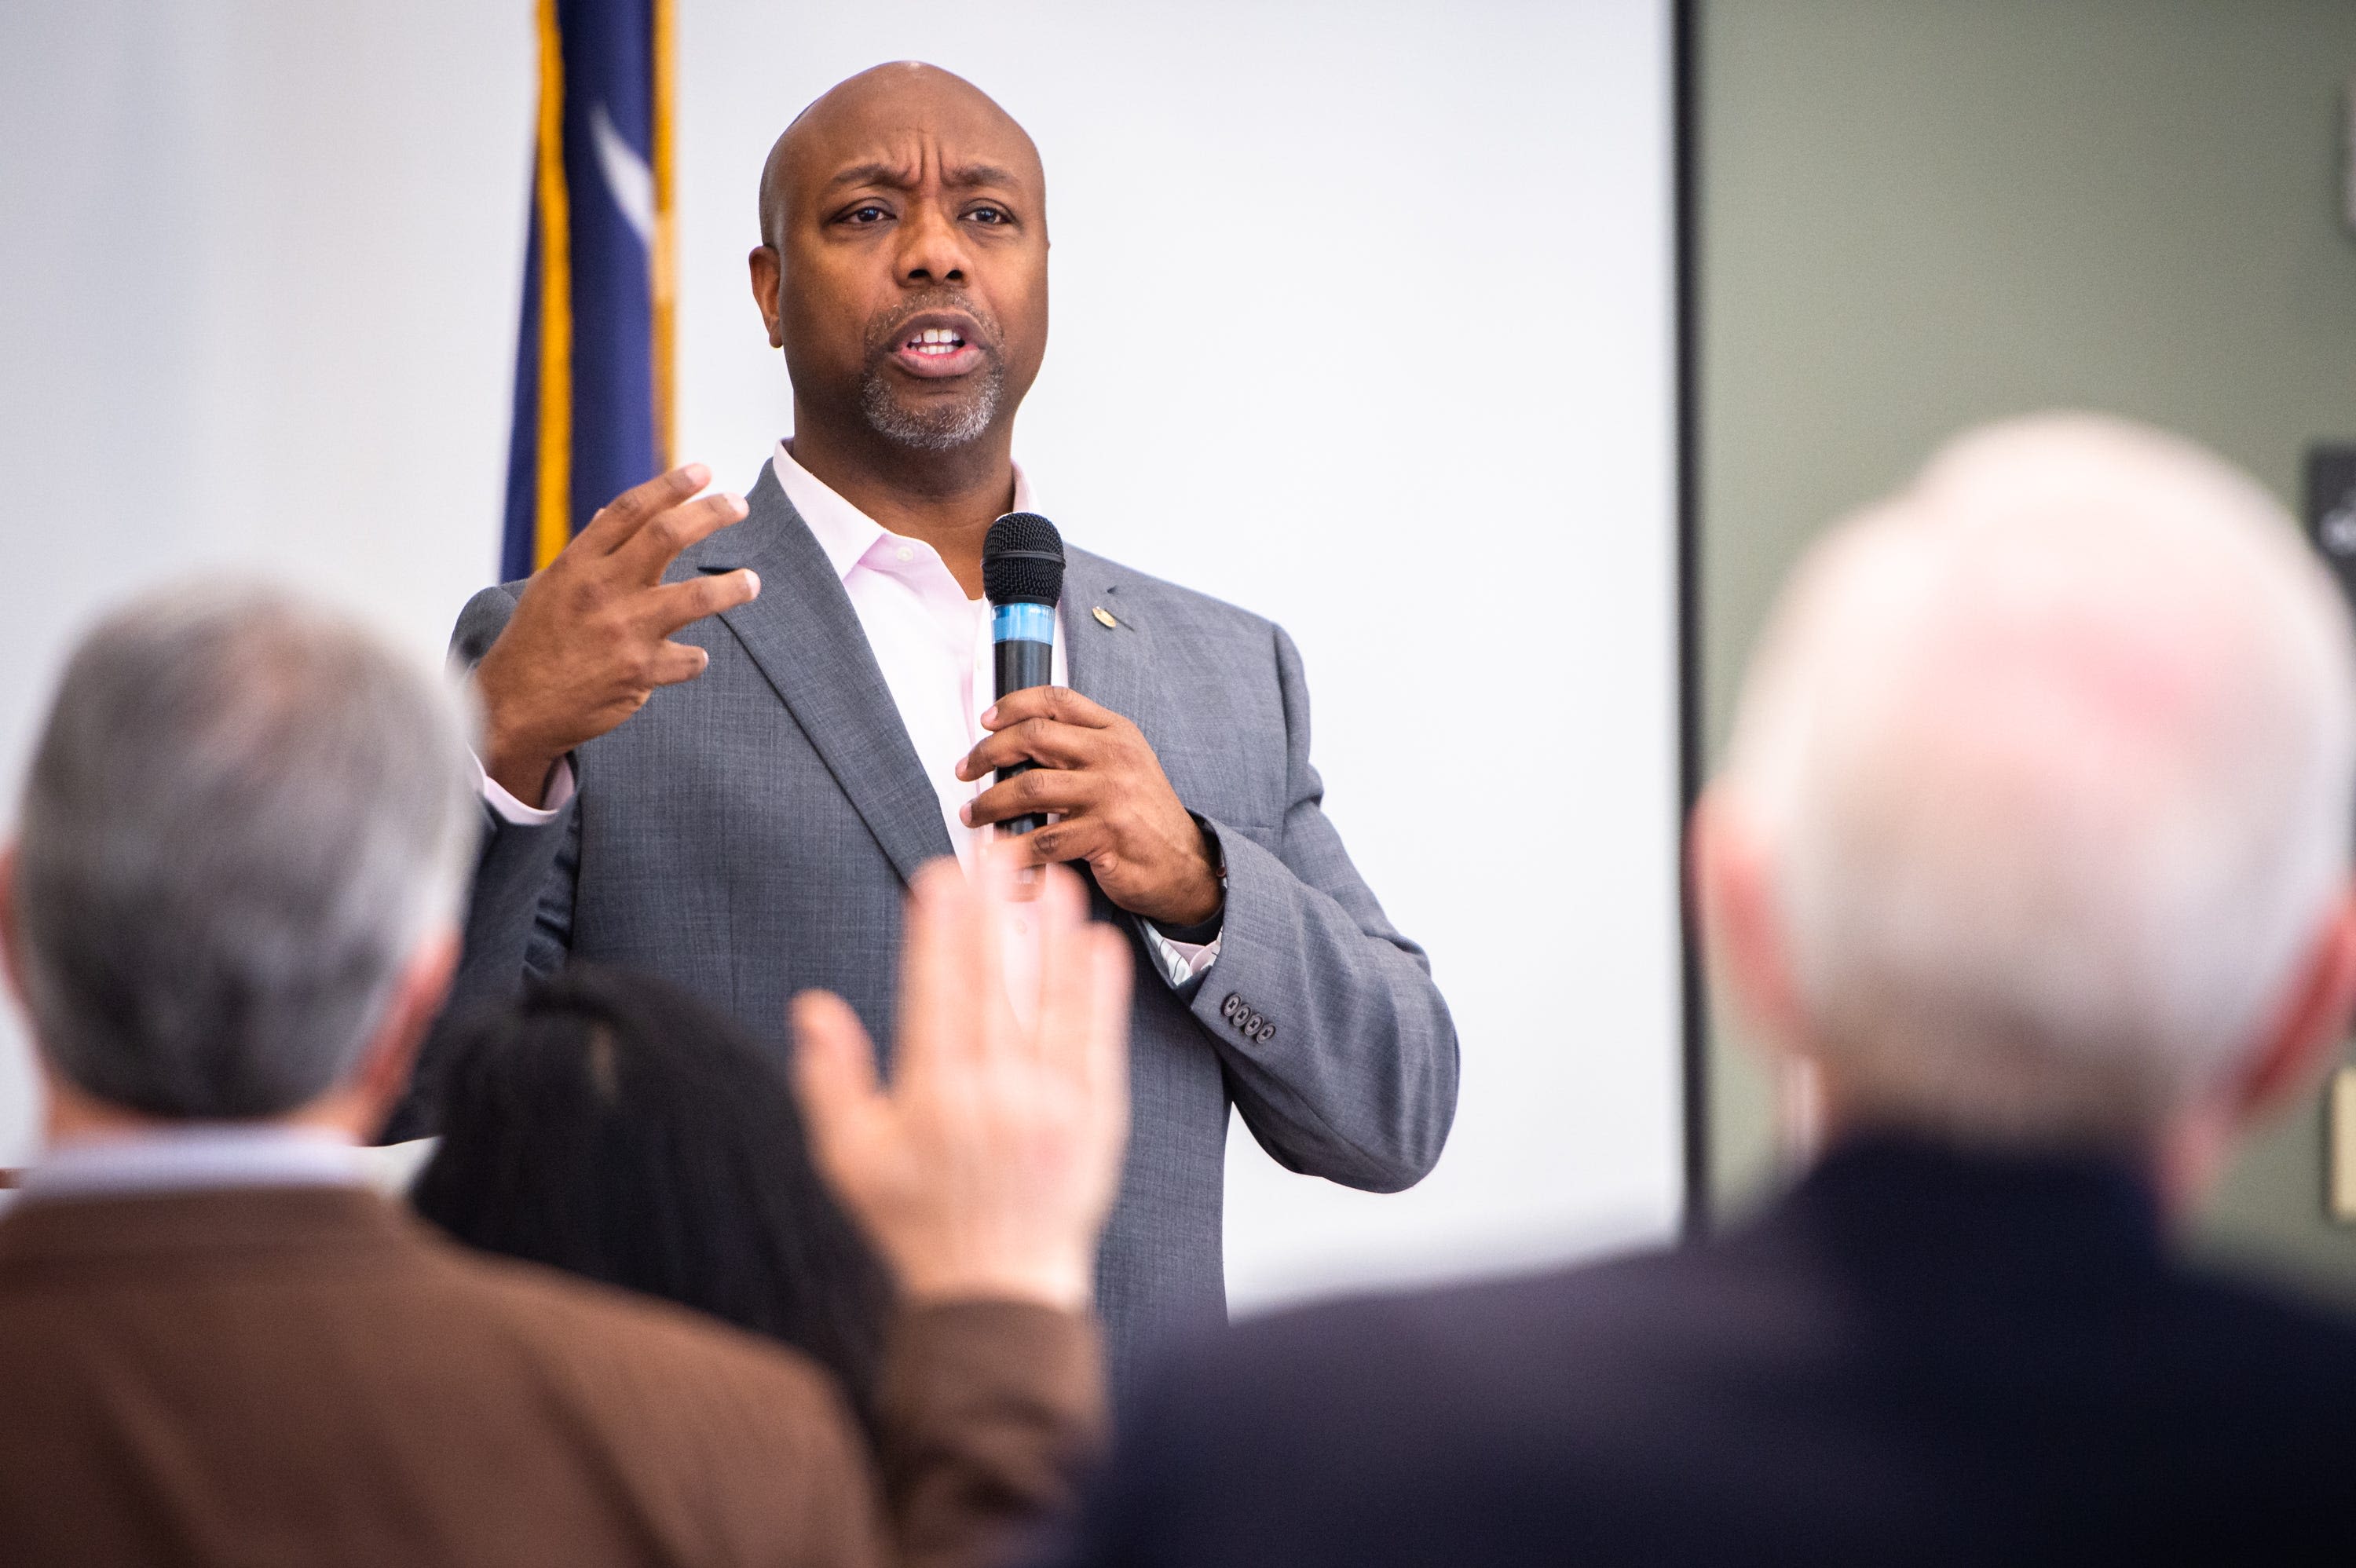 Sen. Tim Scott to be married in South Carolina this weekend, what we know so far